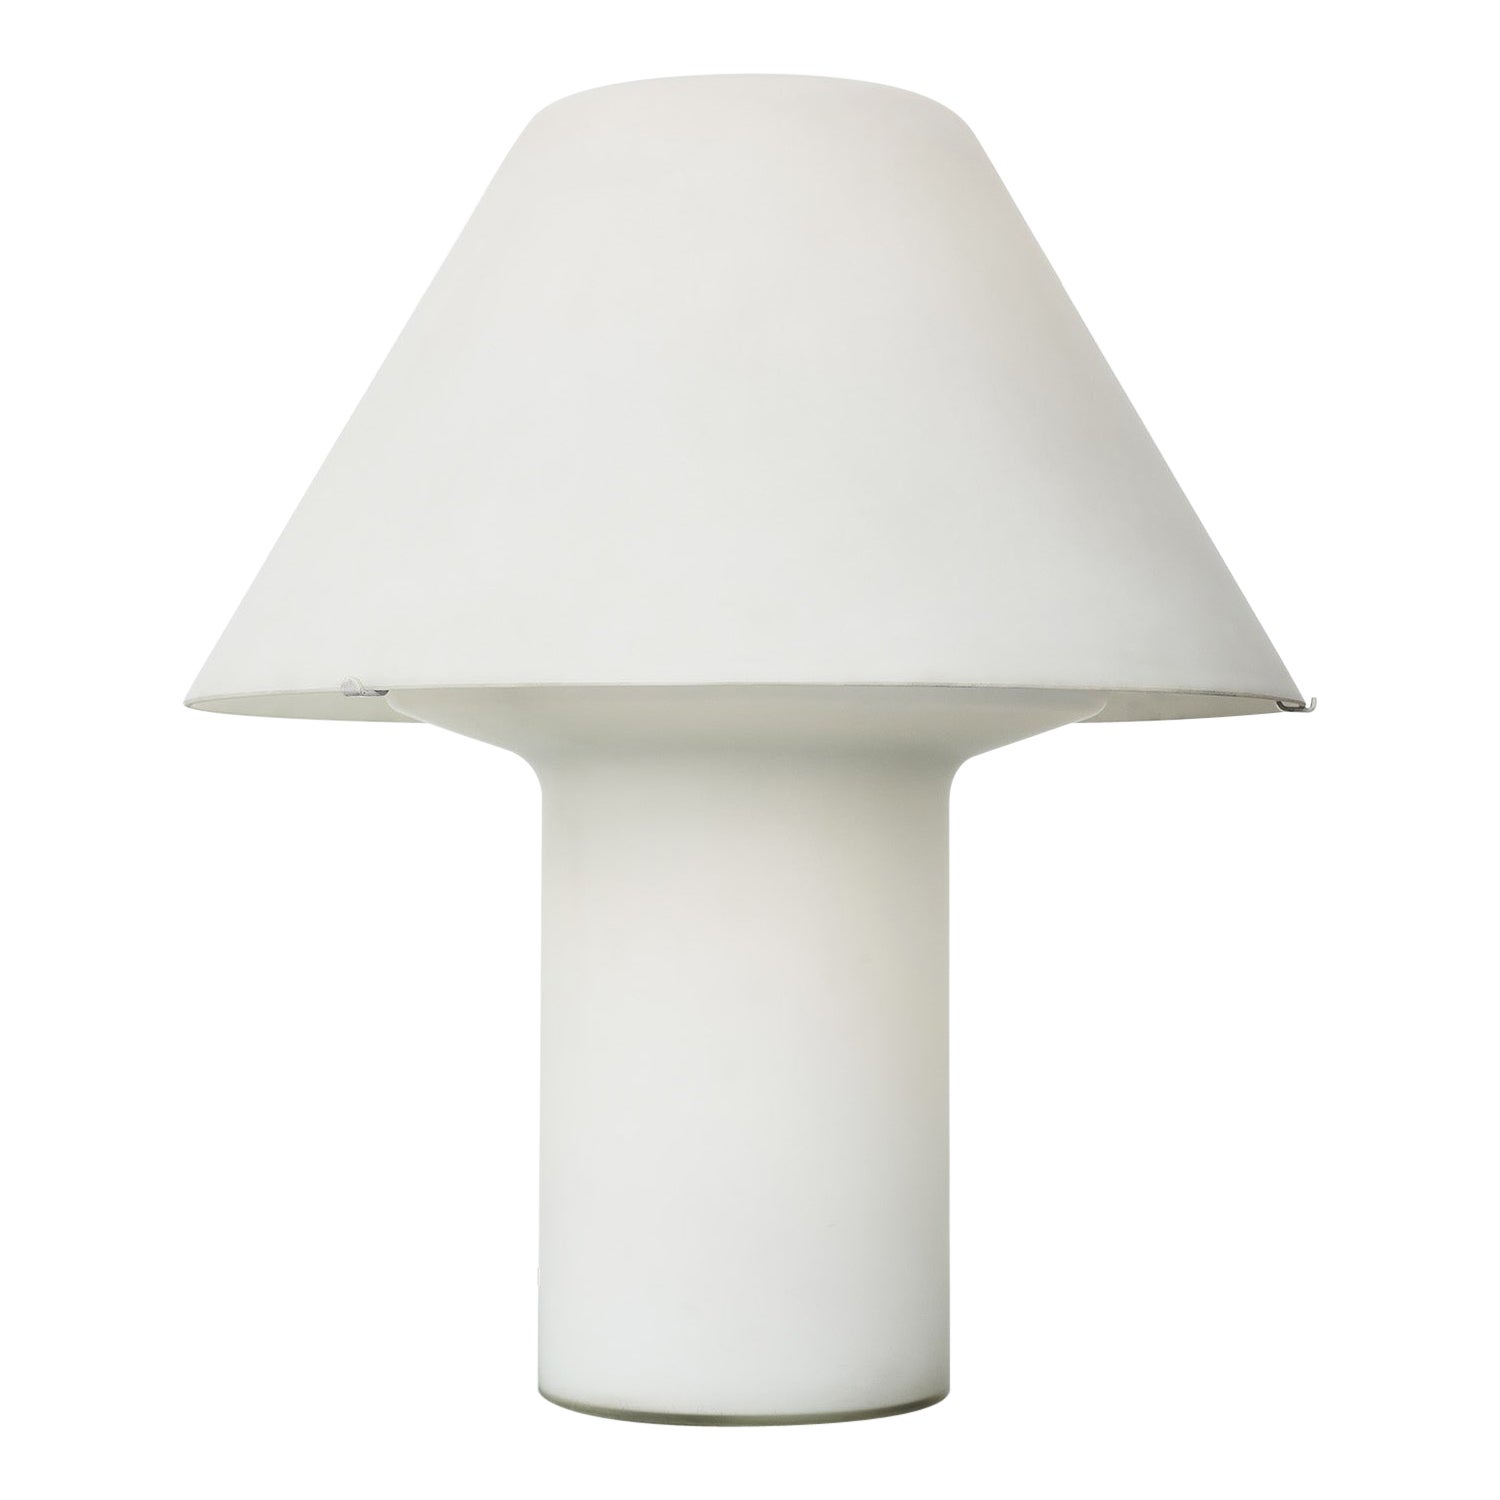 Frosted opal glass mushroom table lamp